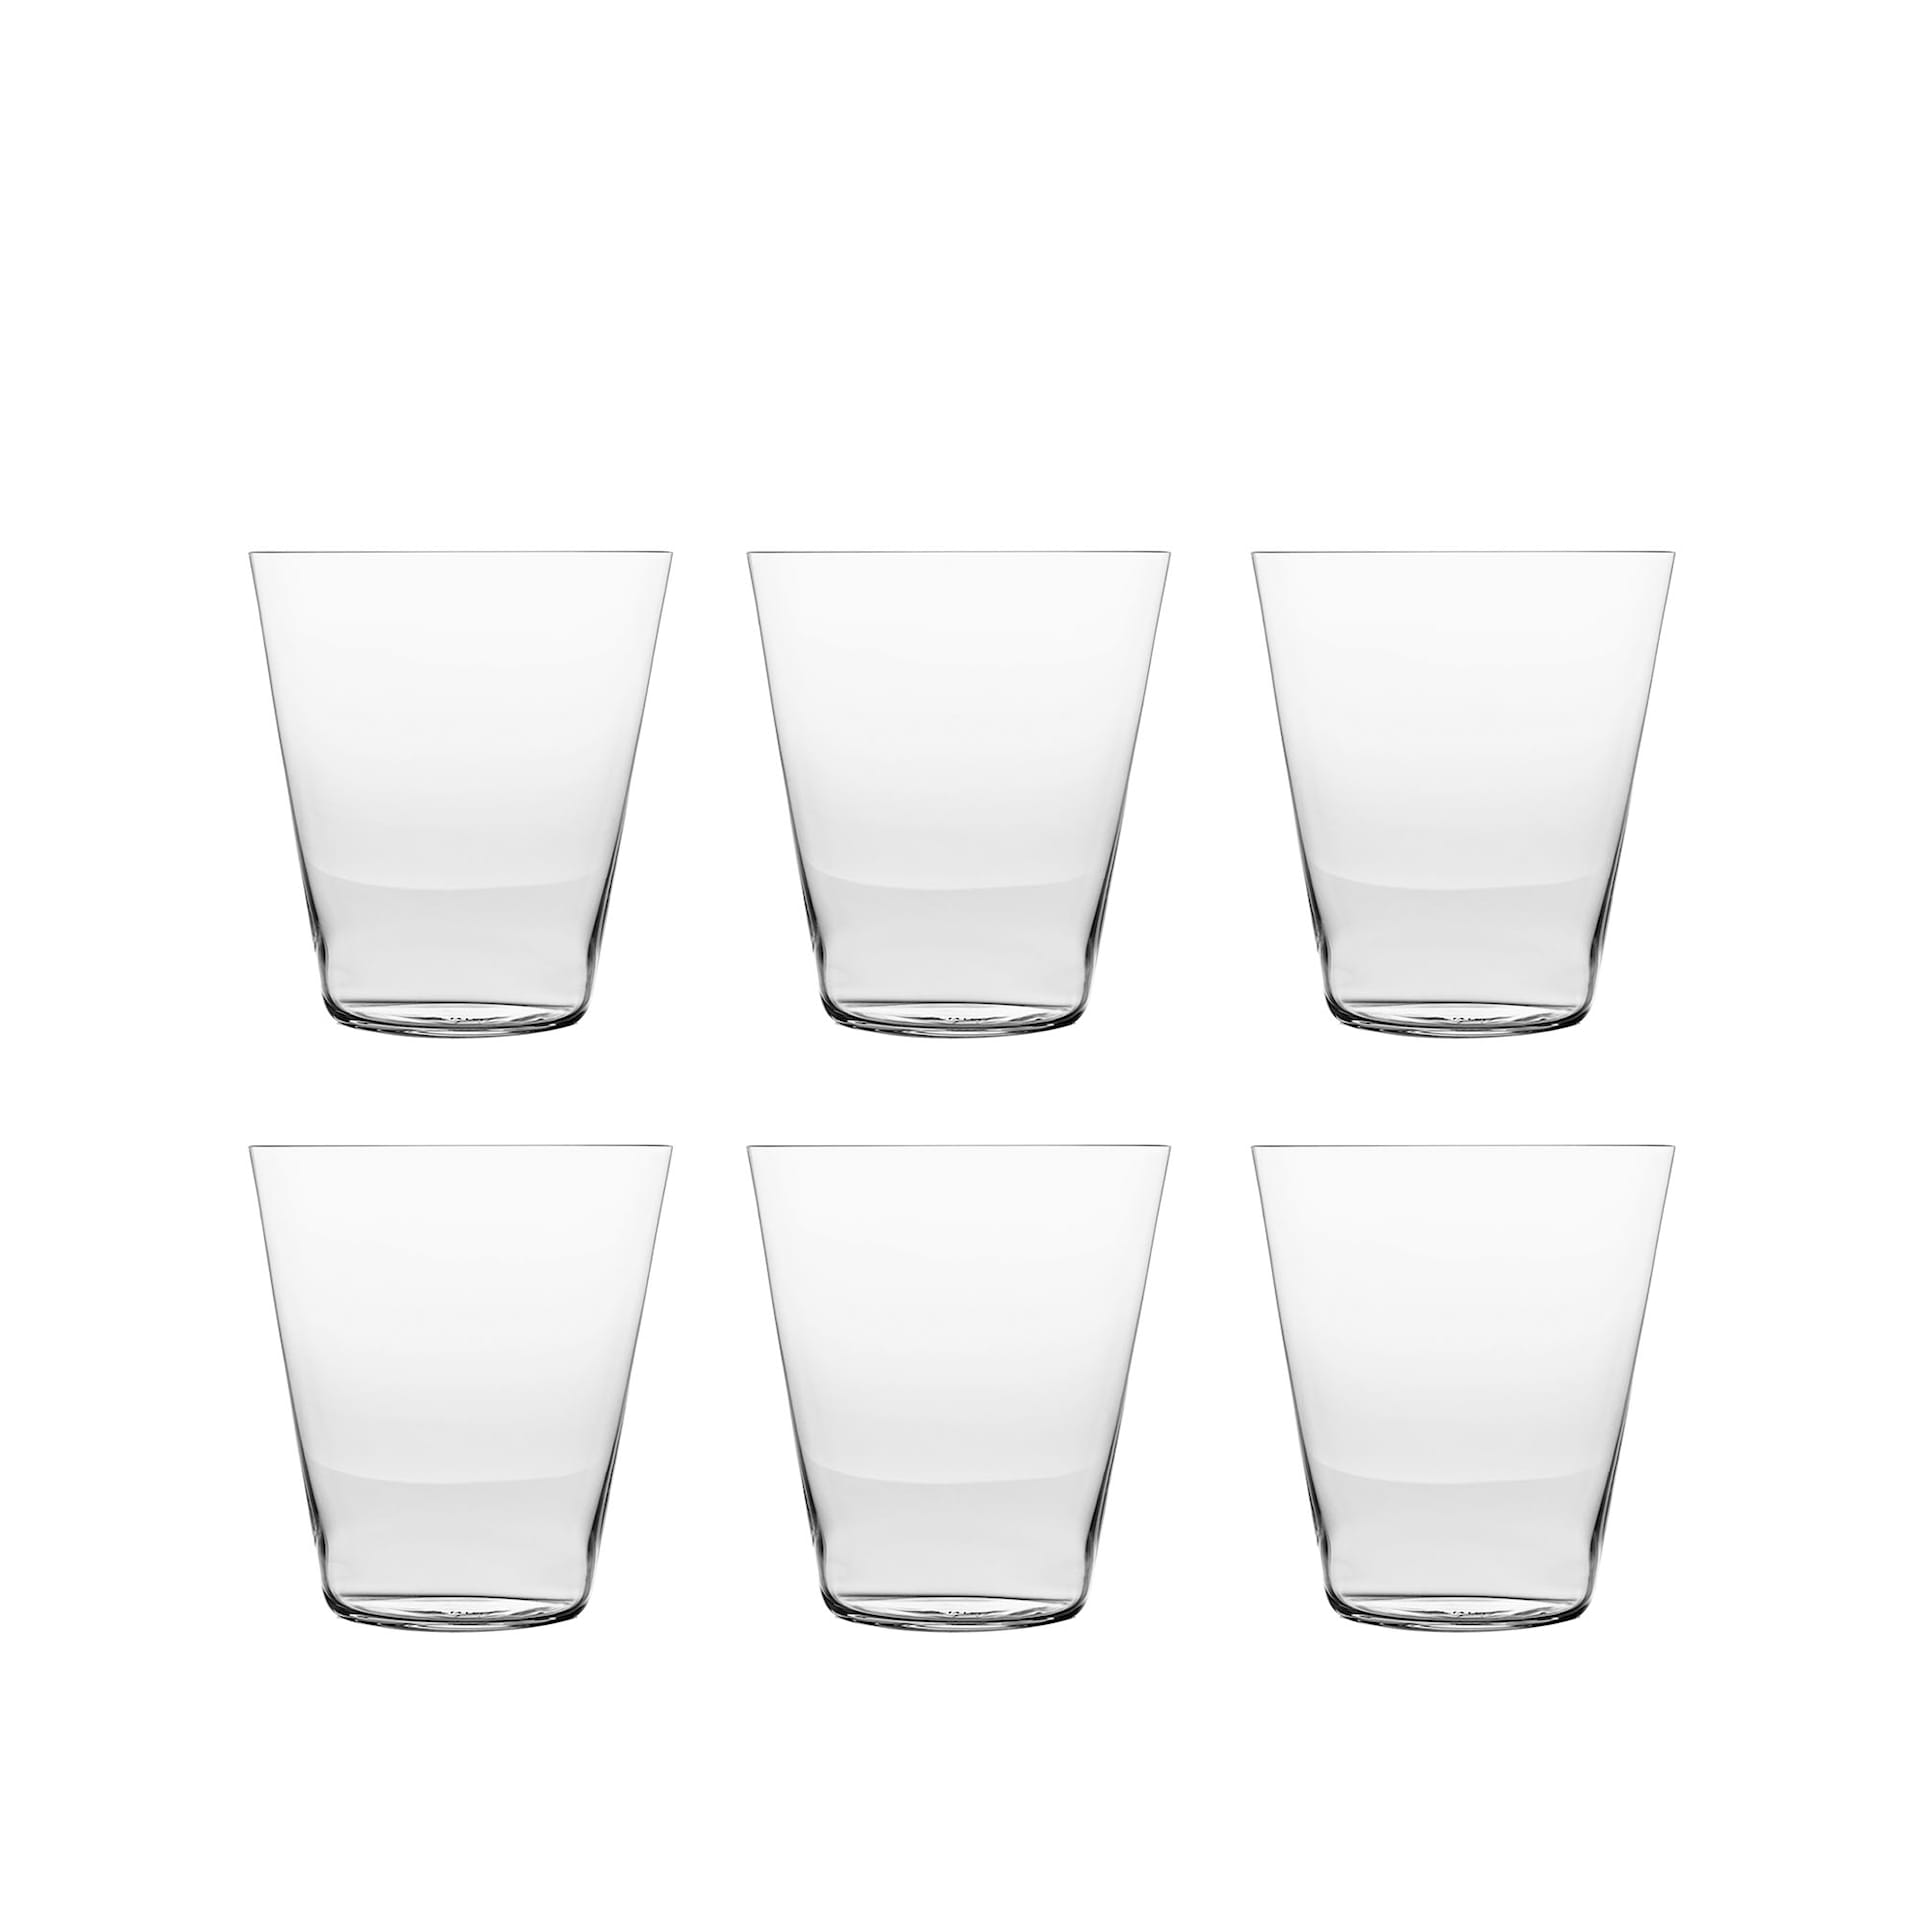 W1 Series Glas W1 Coupe Crystal  clear 38 cl 6-Pack - Zalto - NO GA